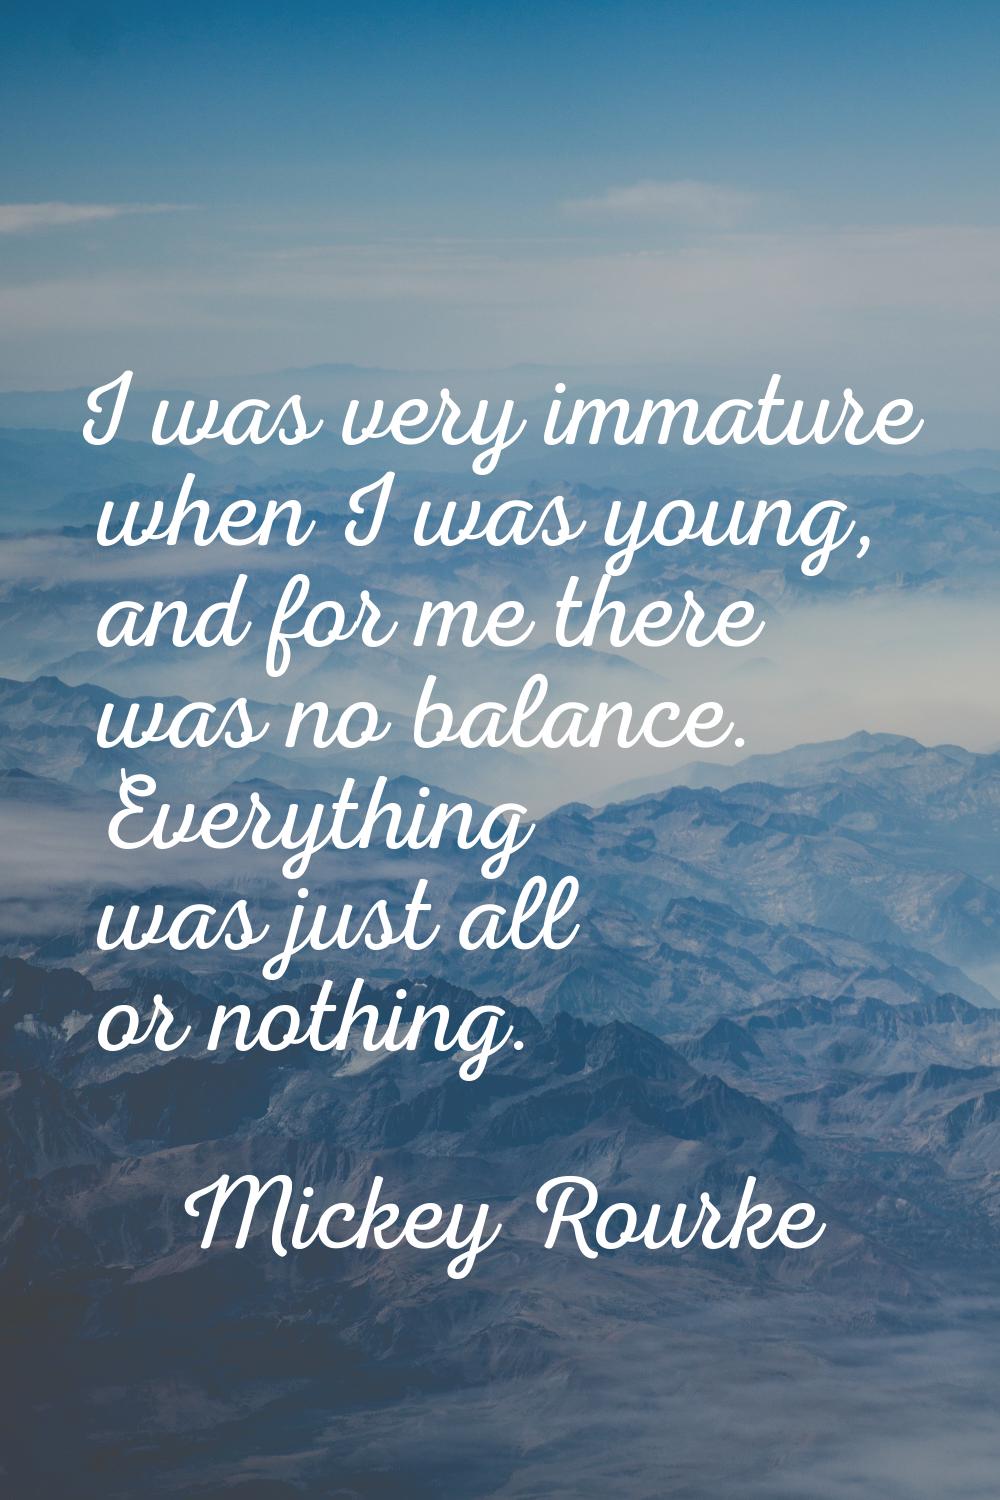 I was very immature when I was young, and for me there was no balance. Everything was just all or n